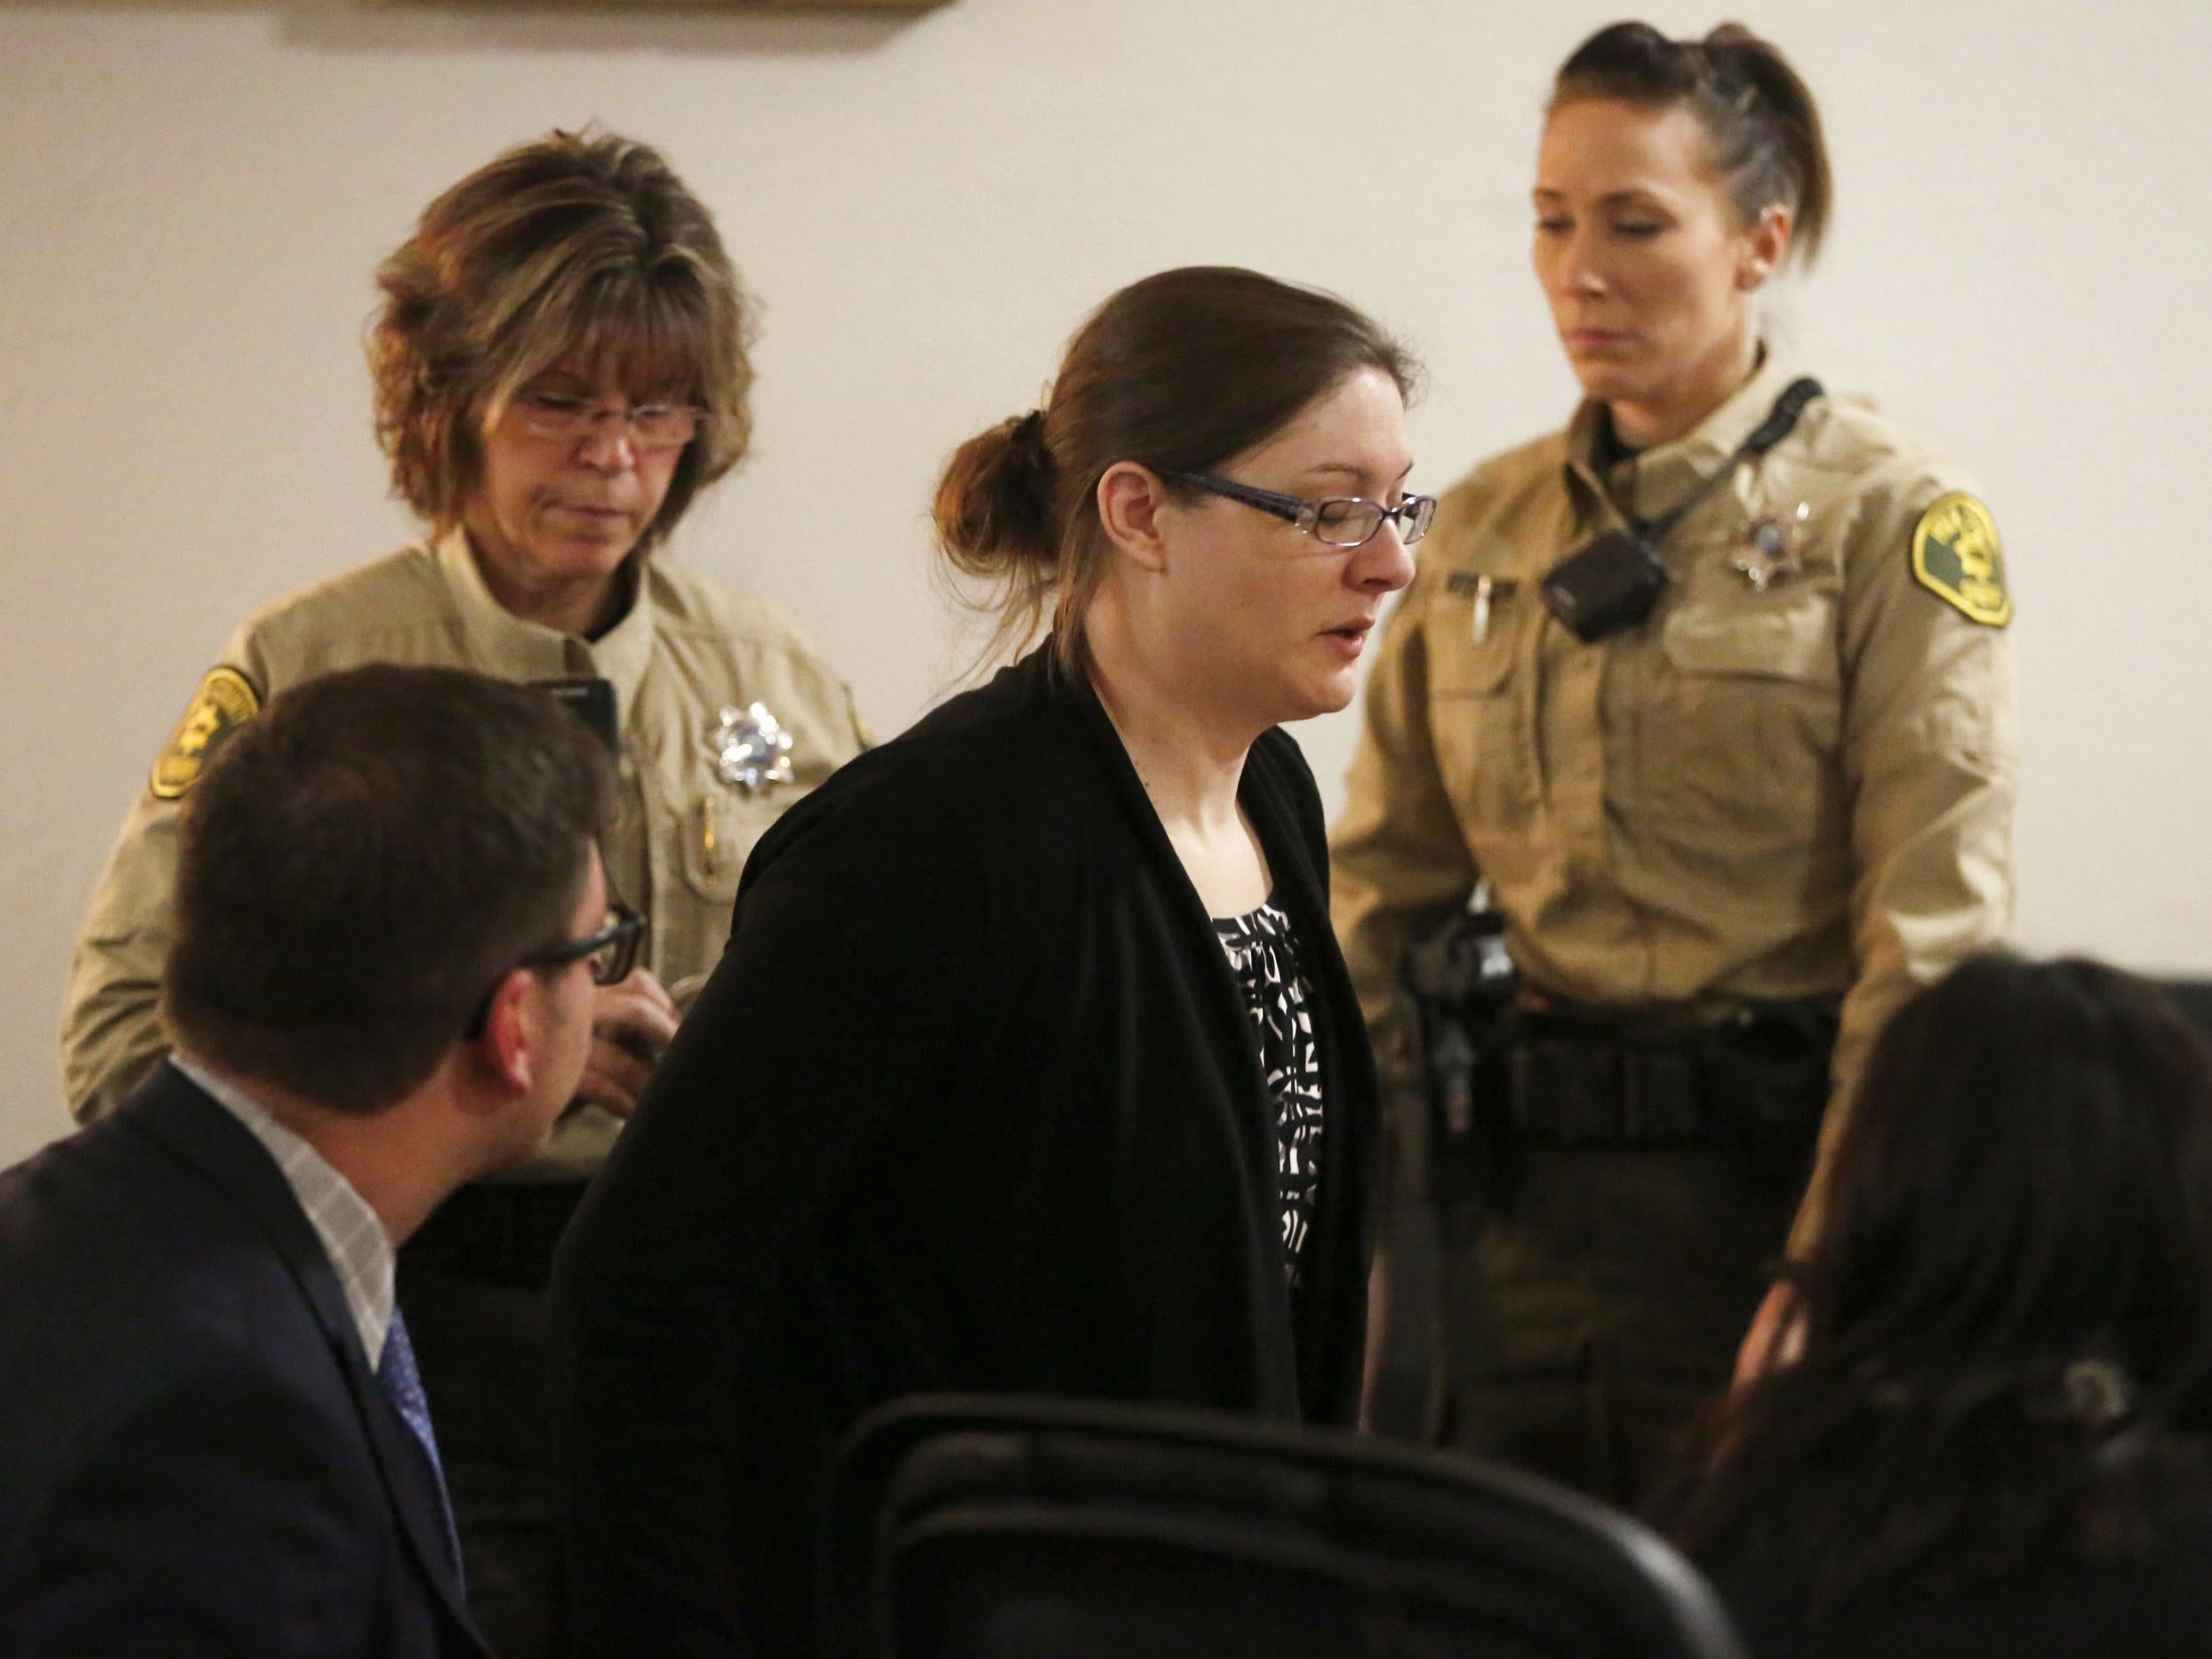 Nicole Finn stands as she is handcuffed by officers on Thursday 14 December 2017 after a jury found her guilty on kidnapping and murder charges in the starvation death of 16-year-old Natalie Finn at the Polk County Courthouse in Des Moines, Iowa